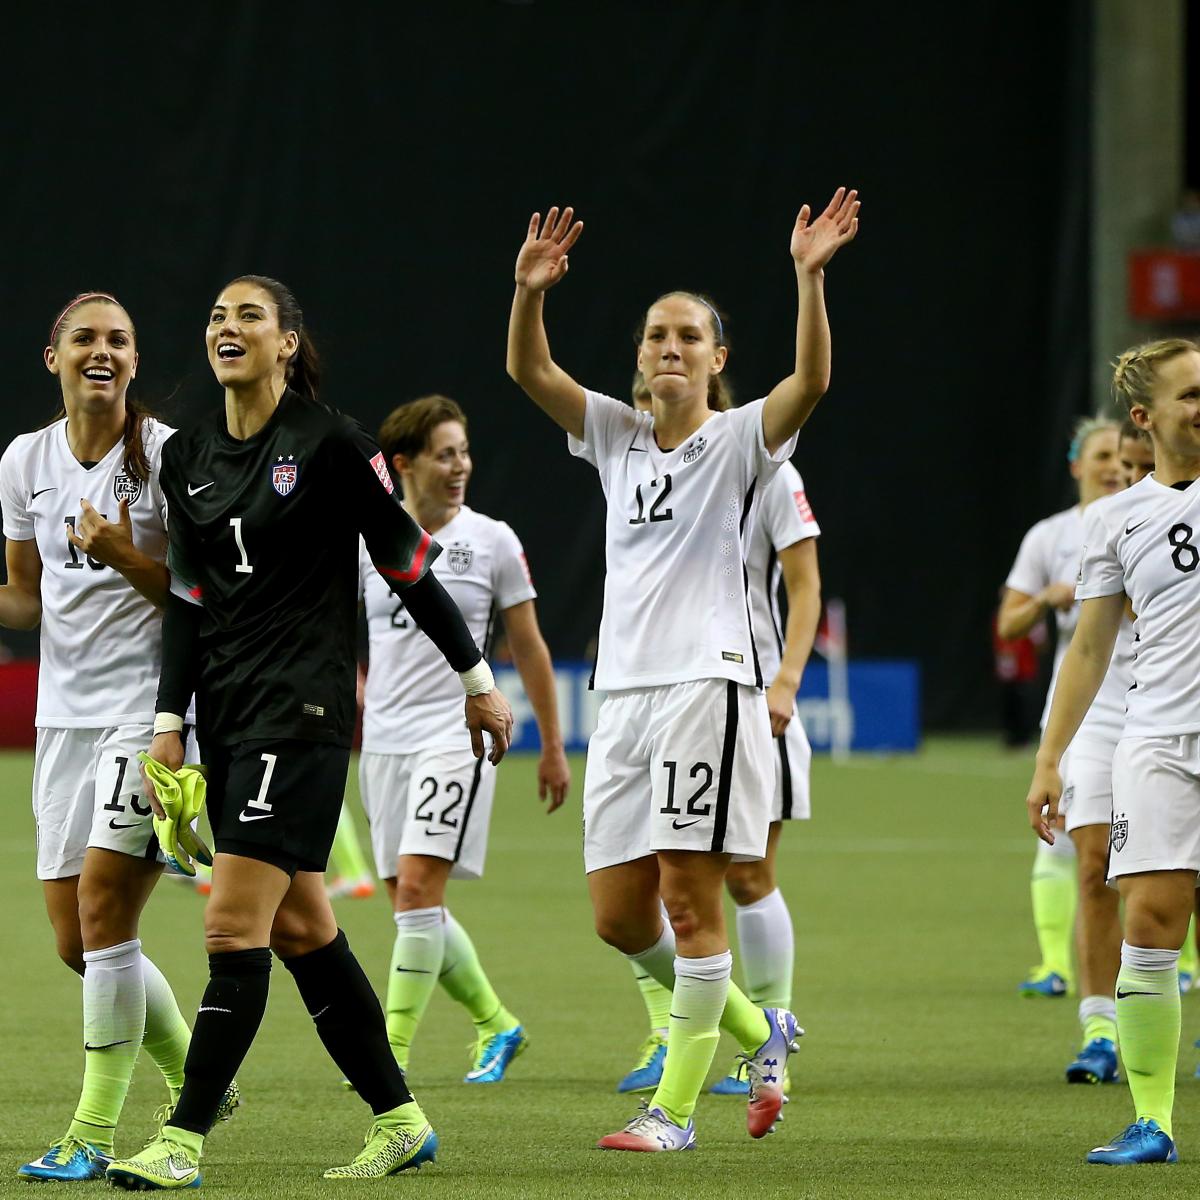 Women's World Cup Schedule 2015 Finals Date, TV Coverage and Info Hub